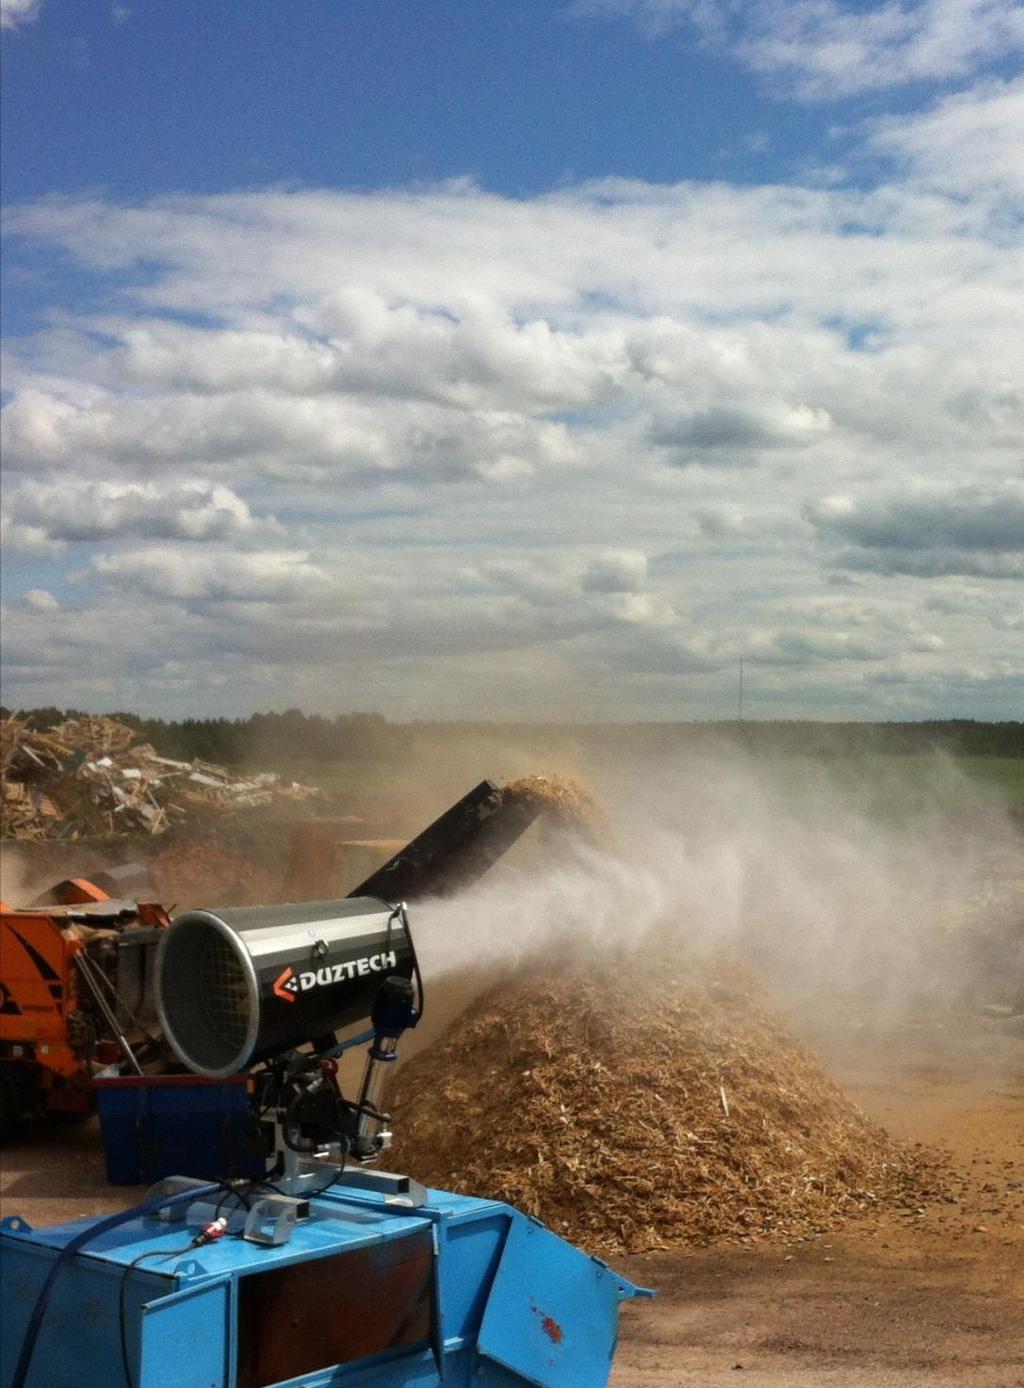 DUZTECH AB provide solutions for dust suppression. OUR PRODUCTS work with water. A mist of micro water droplets (optimized to the right size) is sprayed to suppress the dust.